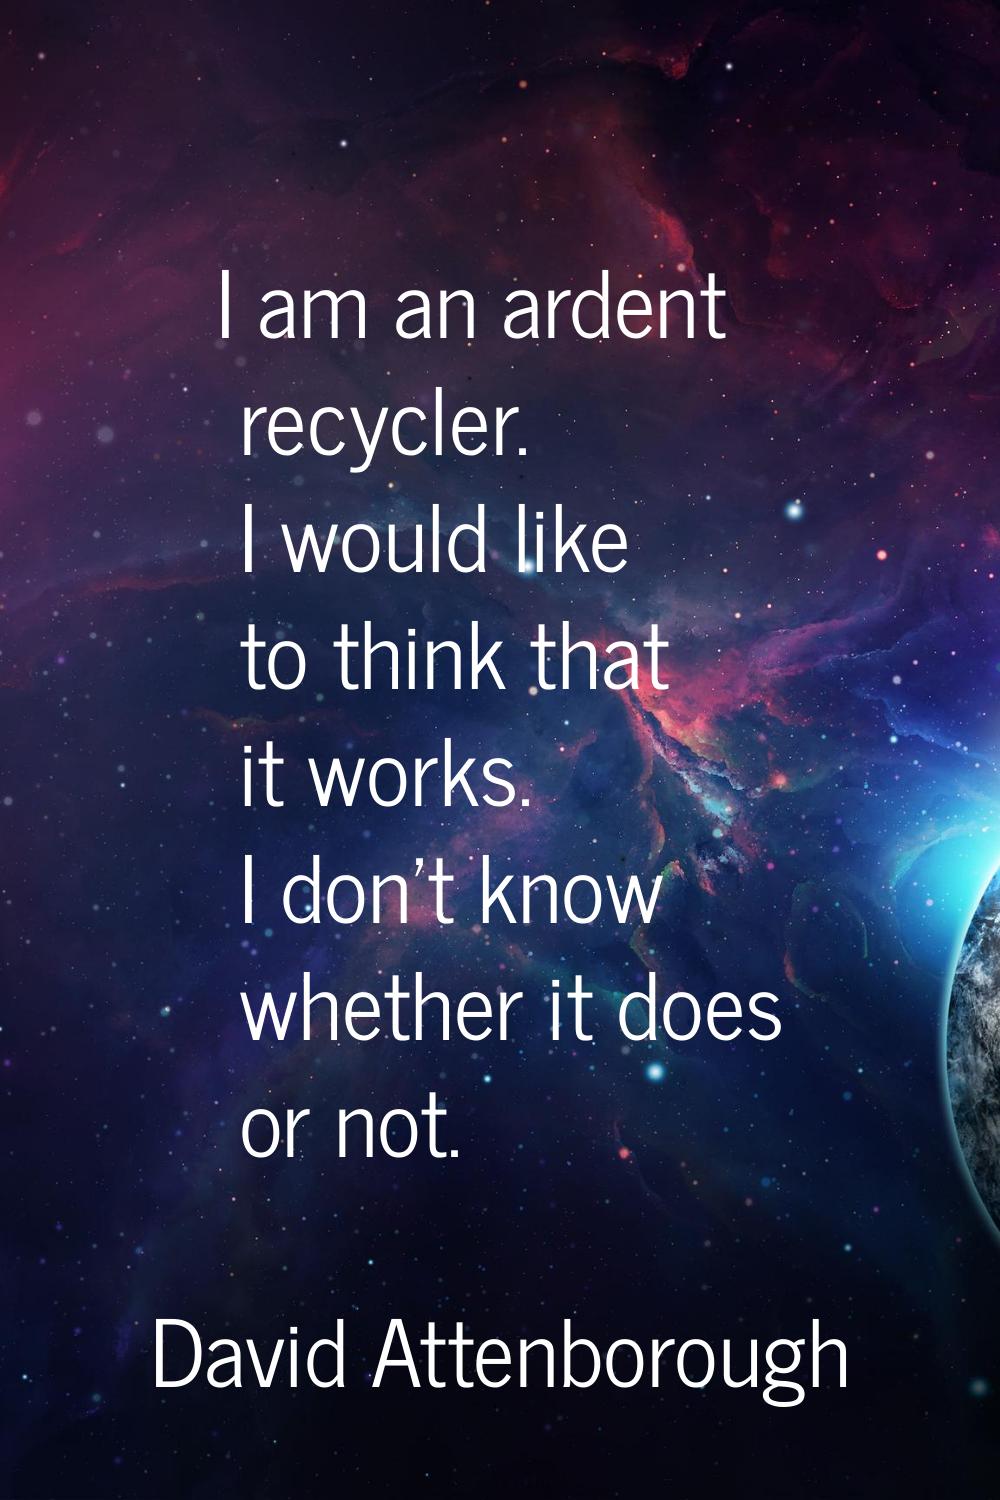 I am an ardent recycler. I would like to think that it works. I don't know whether it does or not.